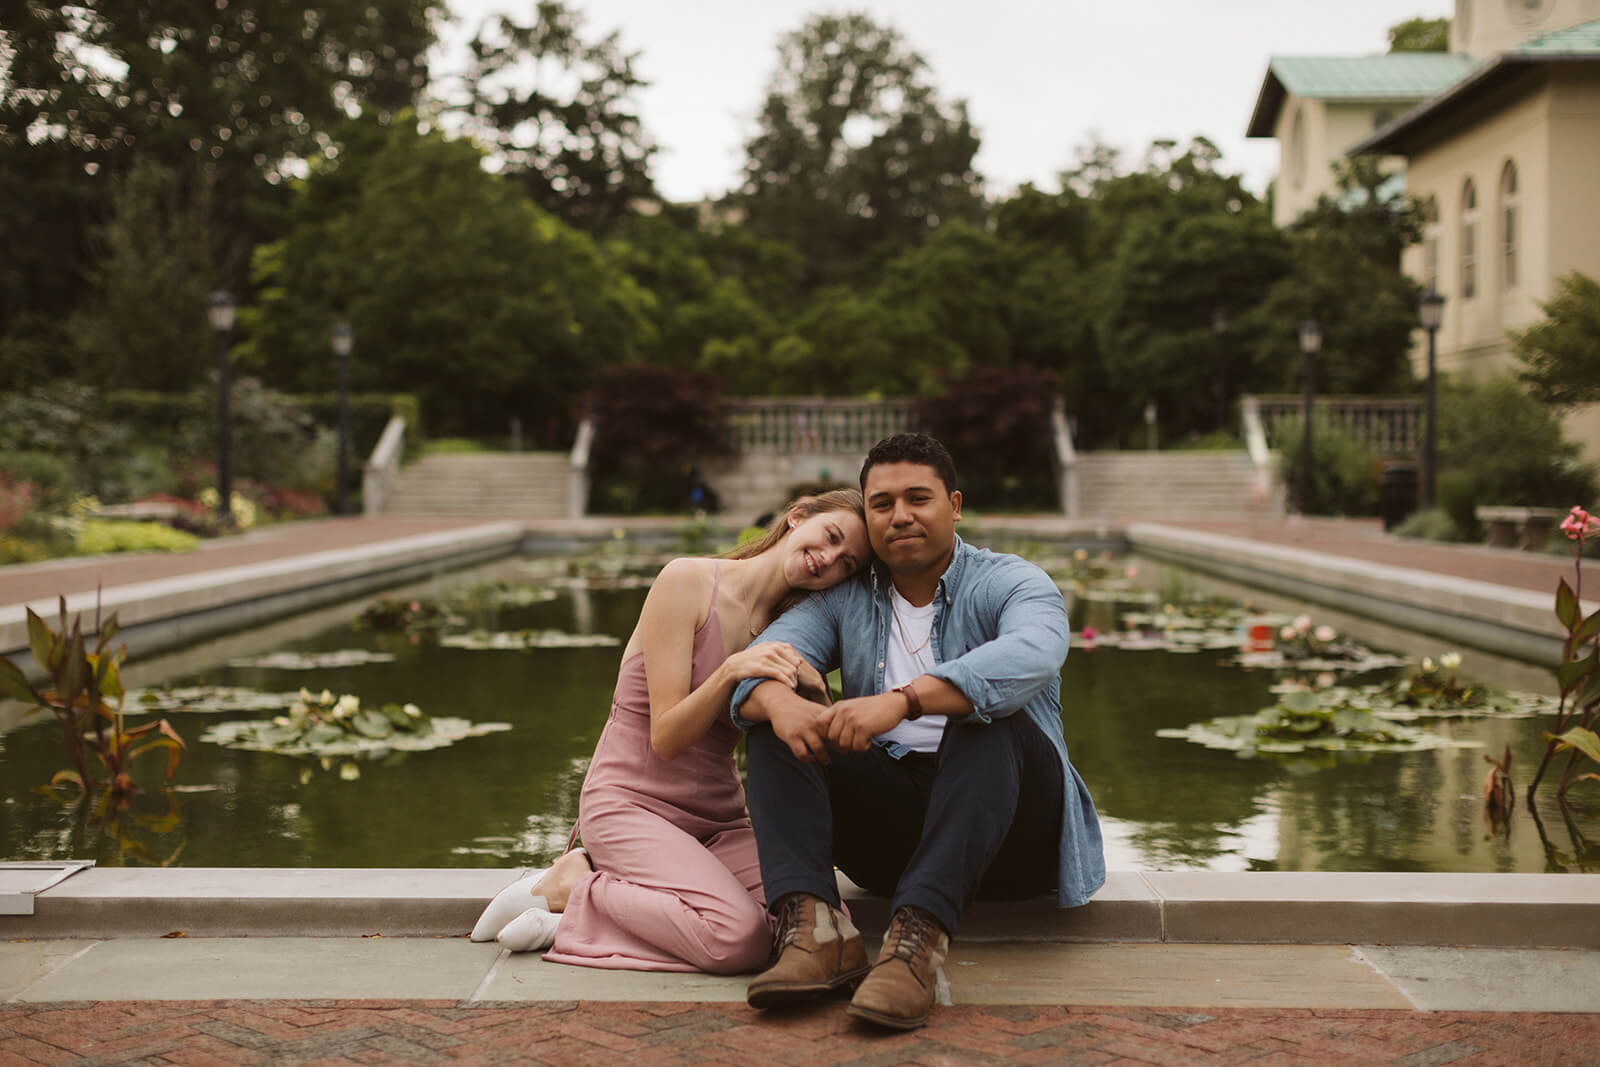 Styled engagement shoot at the Brooklyn Botanic Gardens in Prospect Park, New York City. Photo by OkCrowe Photography.